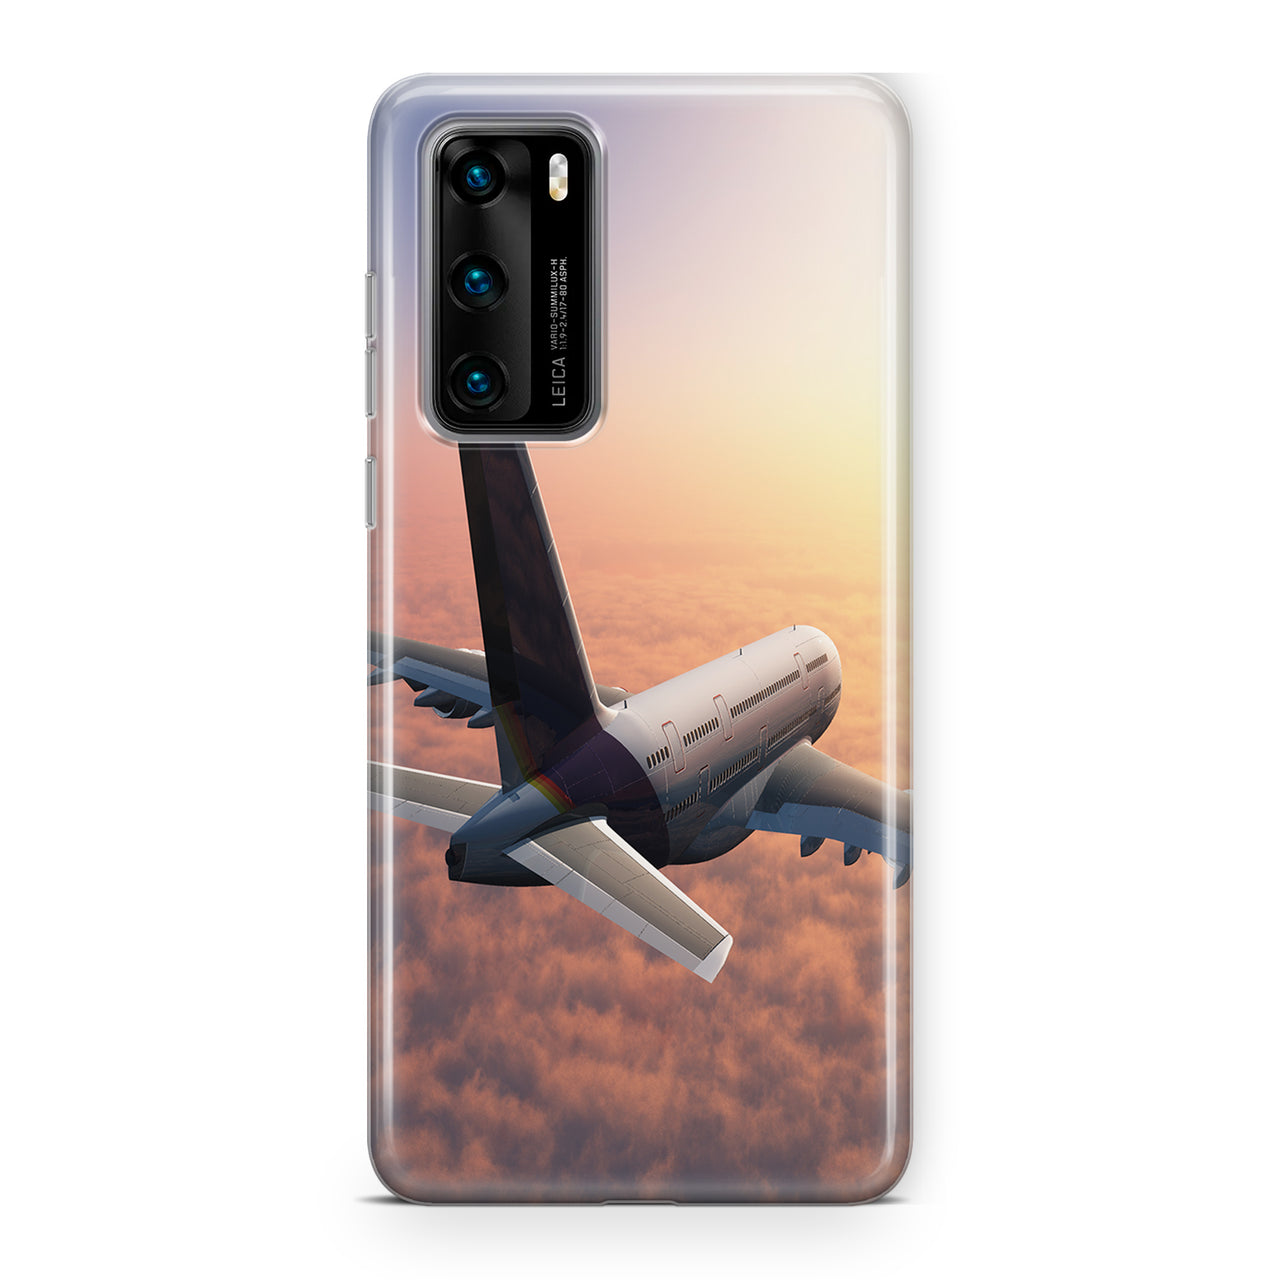 Super Cruising Airbus A380 over Clouds Designed Huawei Cases